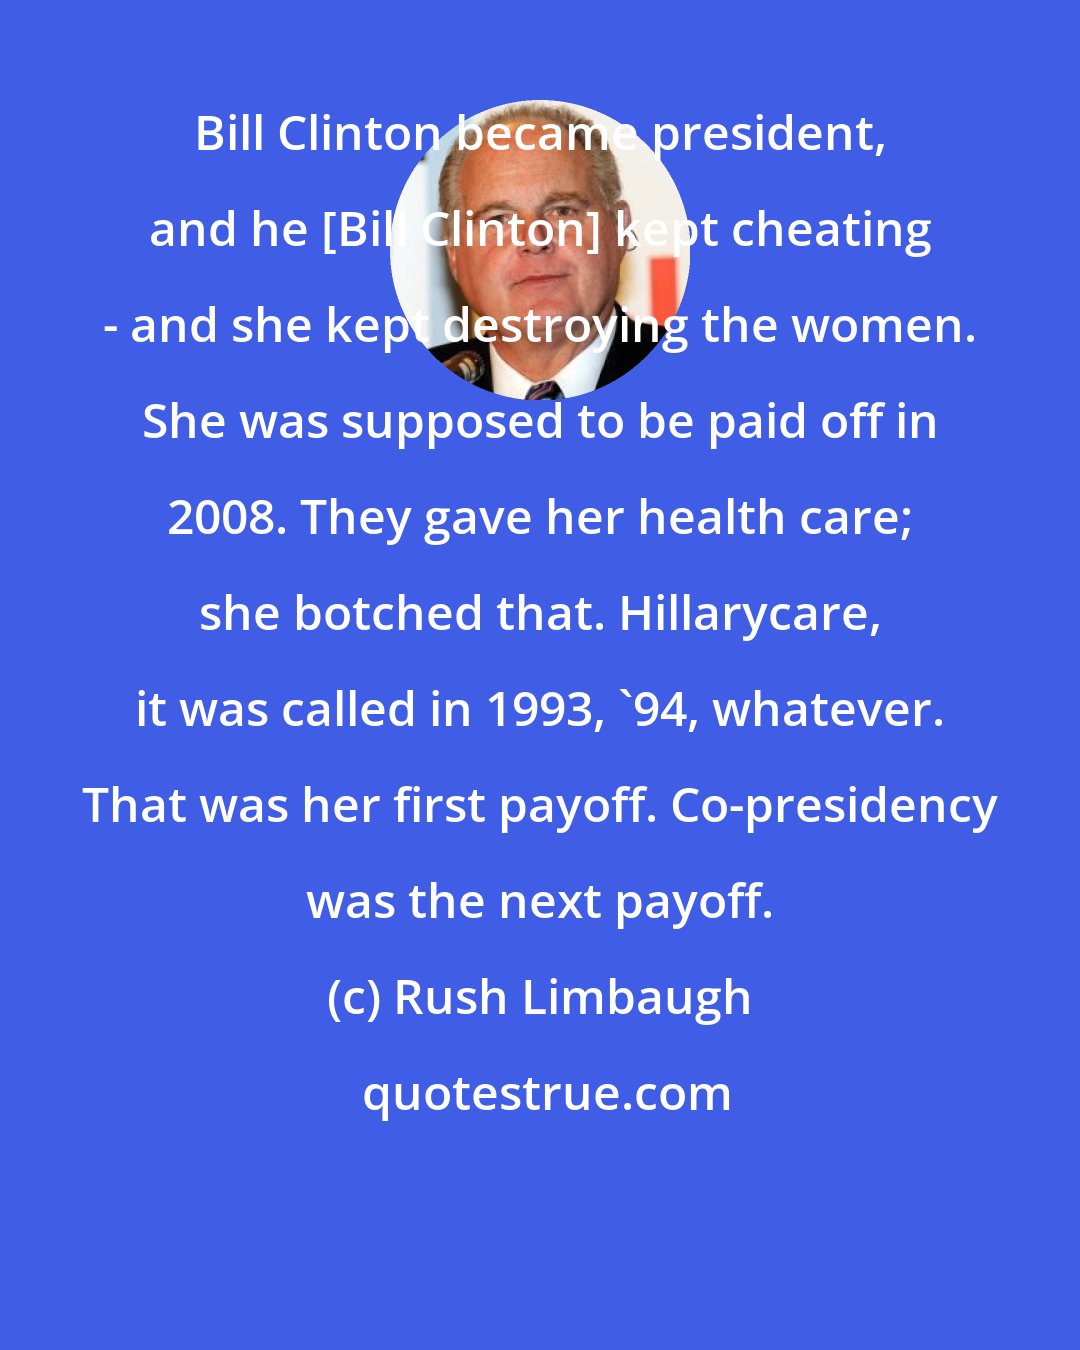 Rush Limbaugh: Bill Clinton became president, and he [Bill Clinton] kept cheating - and she kept destroying the women. She was supposed to be paid off in 2008. They gave her health care; she botched that. Hillarycare, it was called in 1993, '94, whatever. That was her first payoff. Co-presidency was the next payoff.